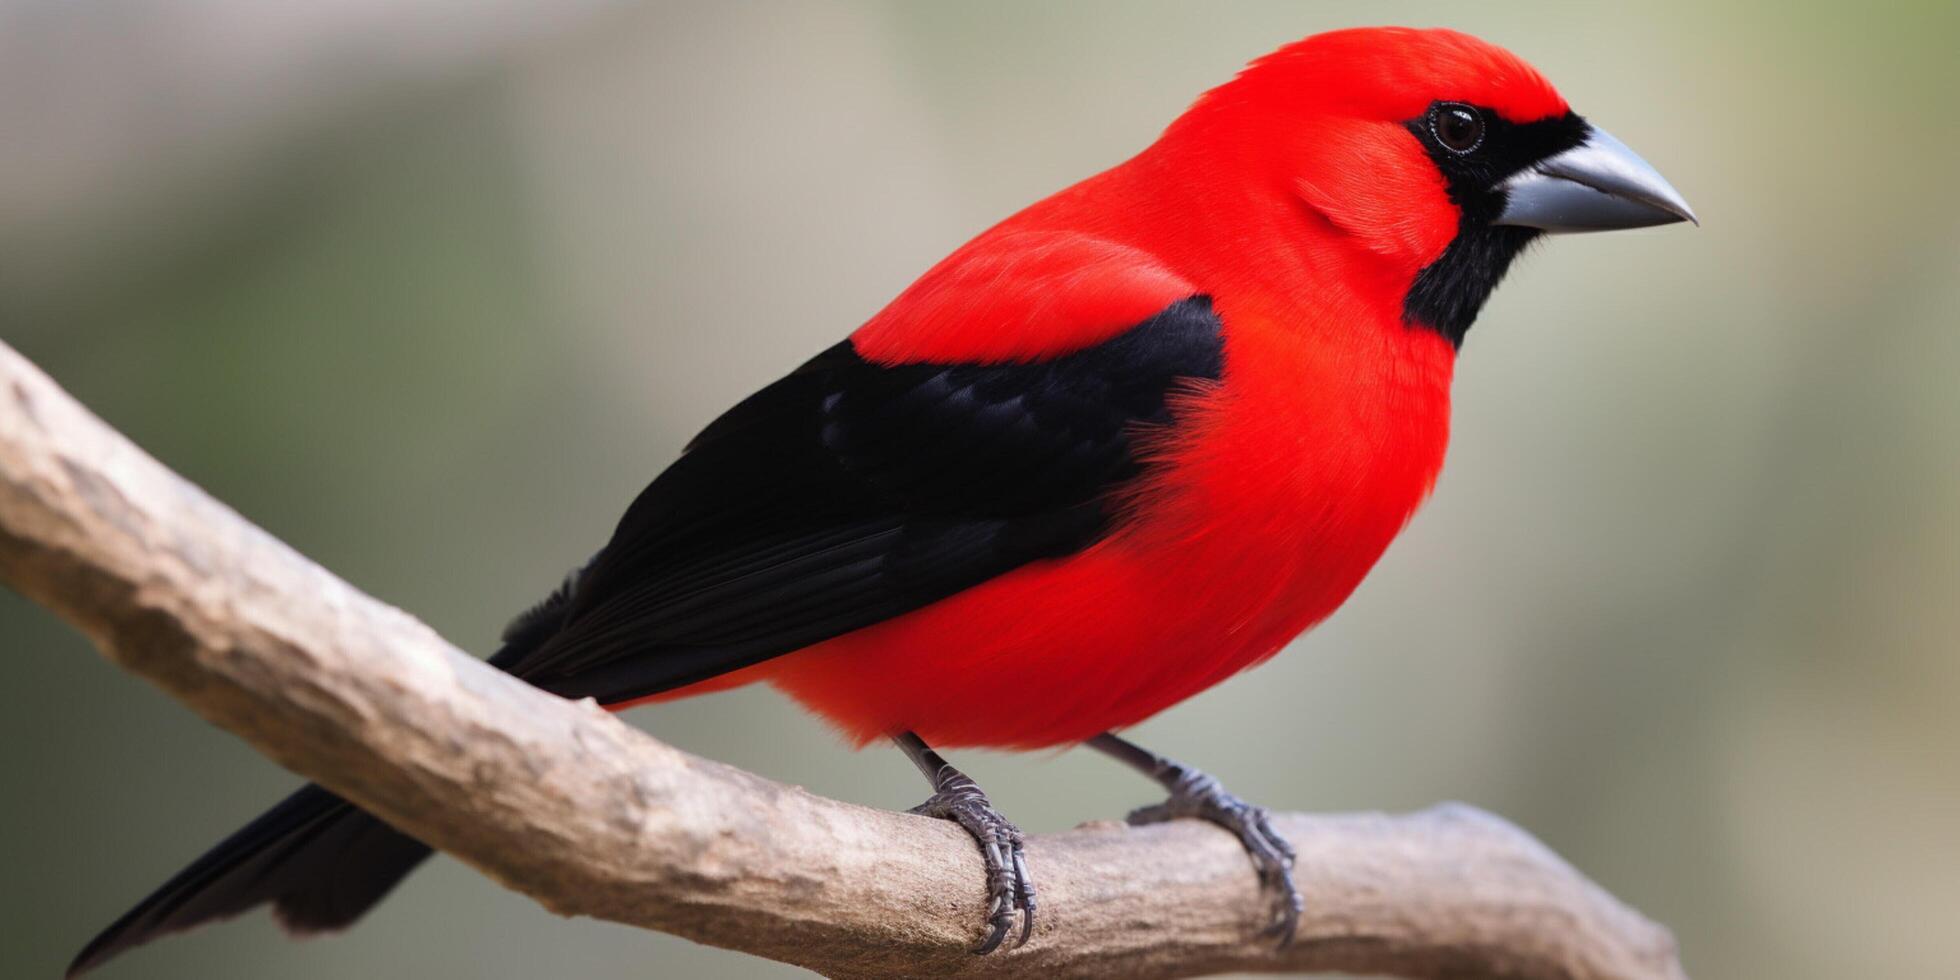 A red bird with a black beak and red feathers photo